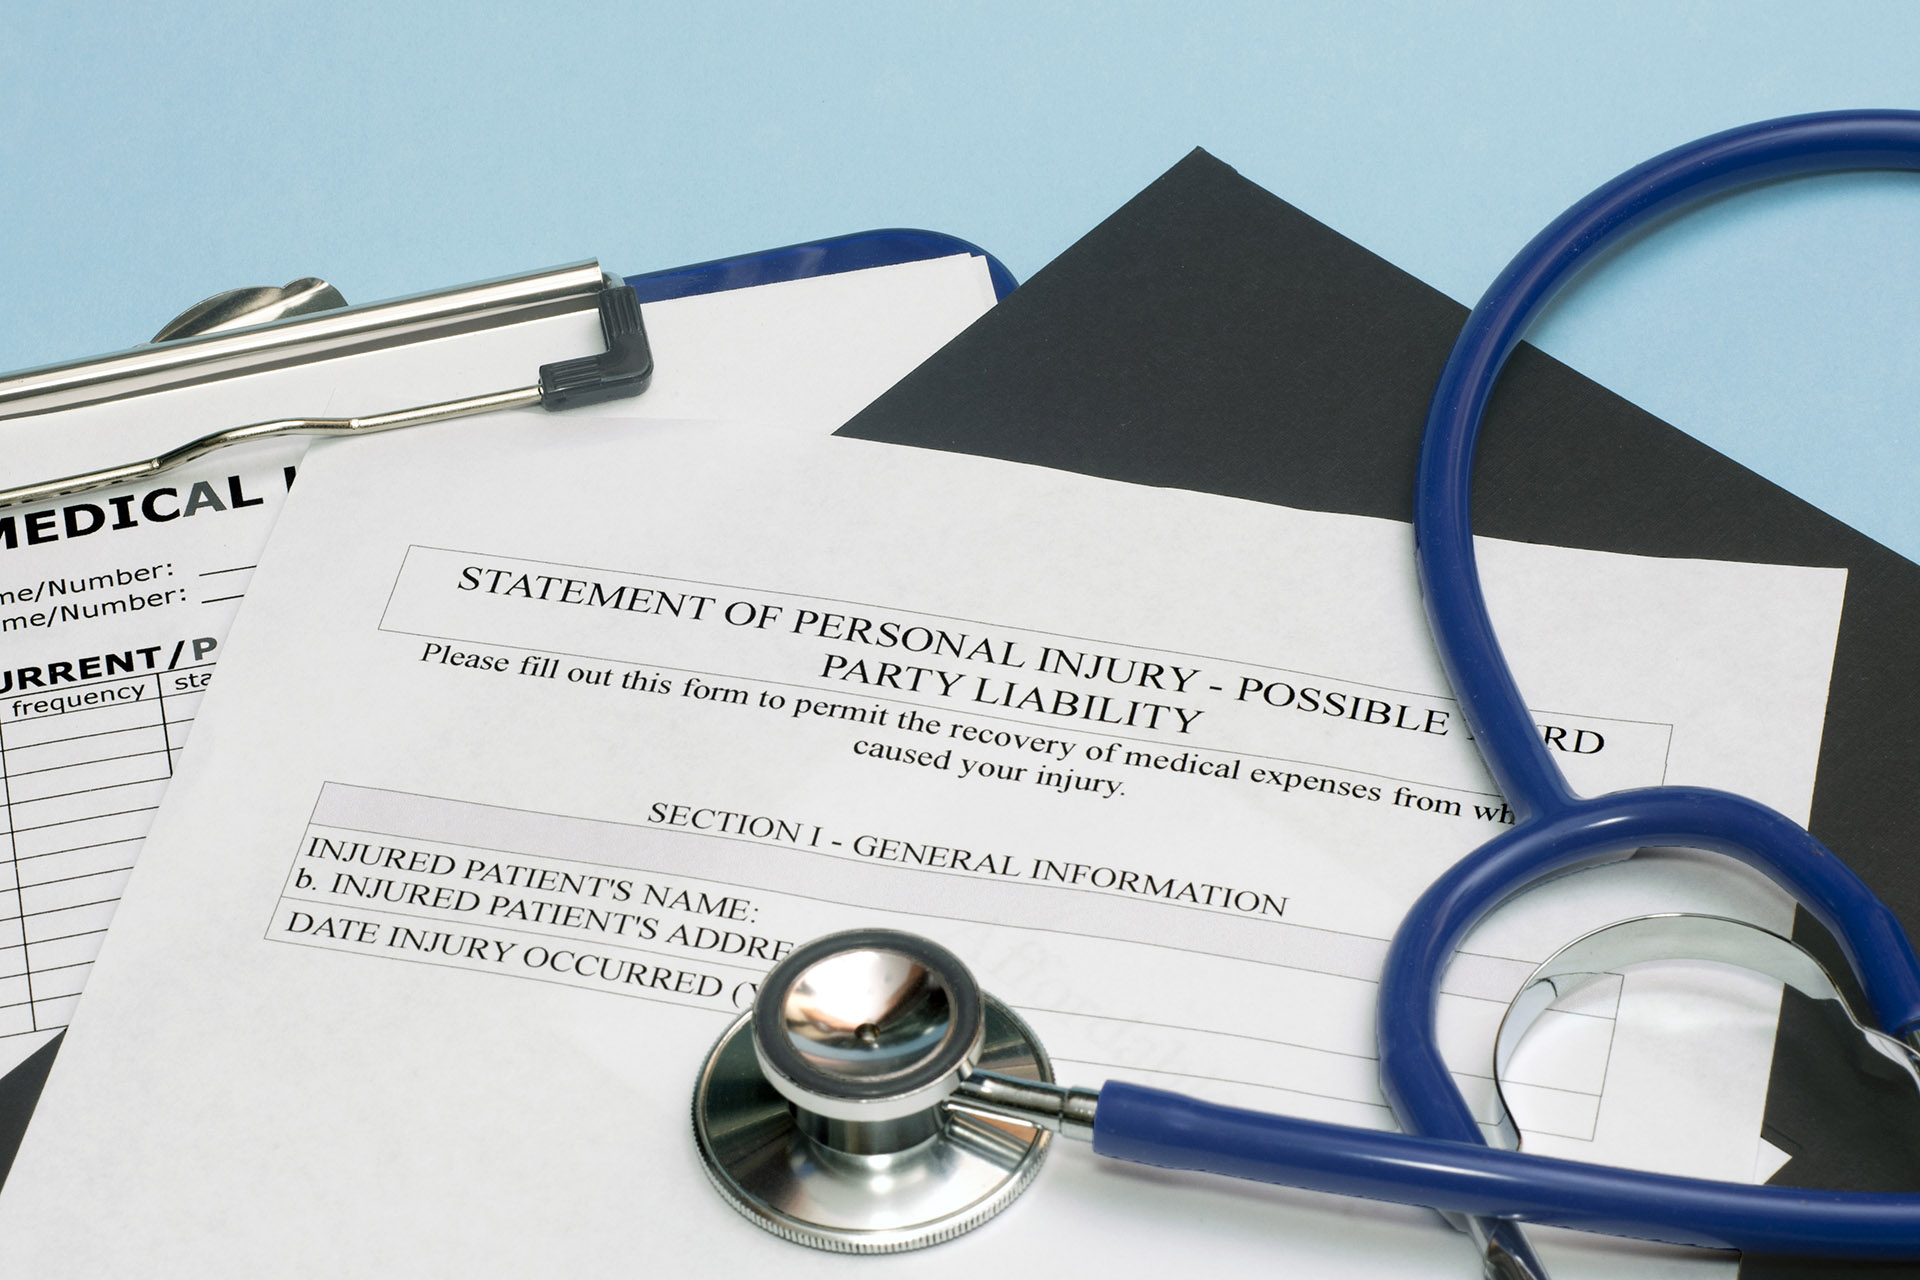 Statement of personal injury form with patient chart and stethoscope.